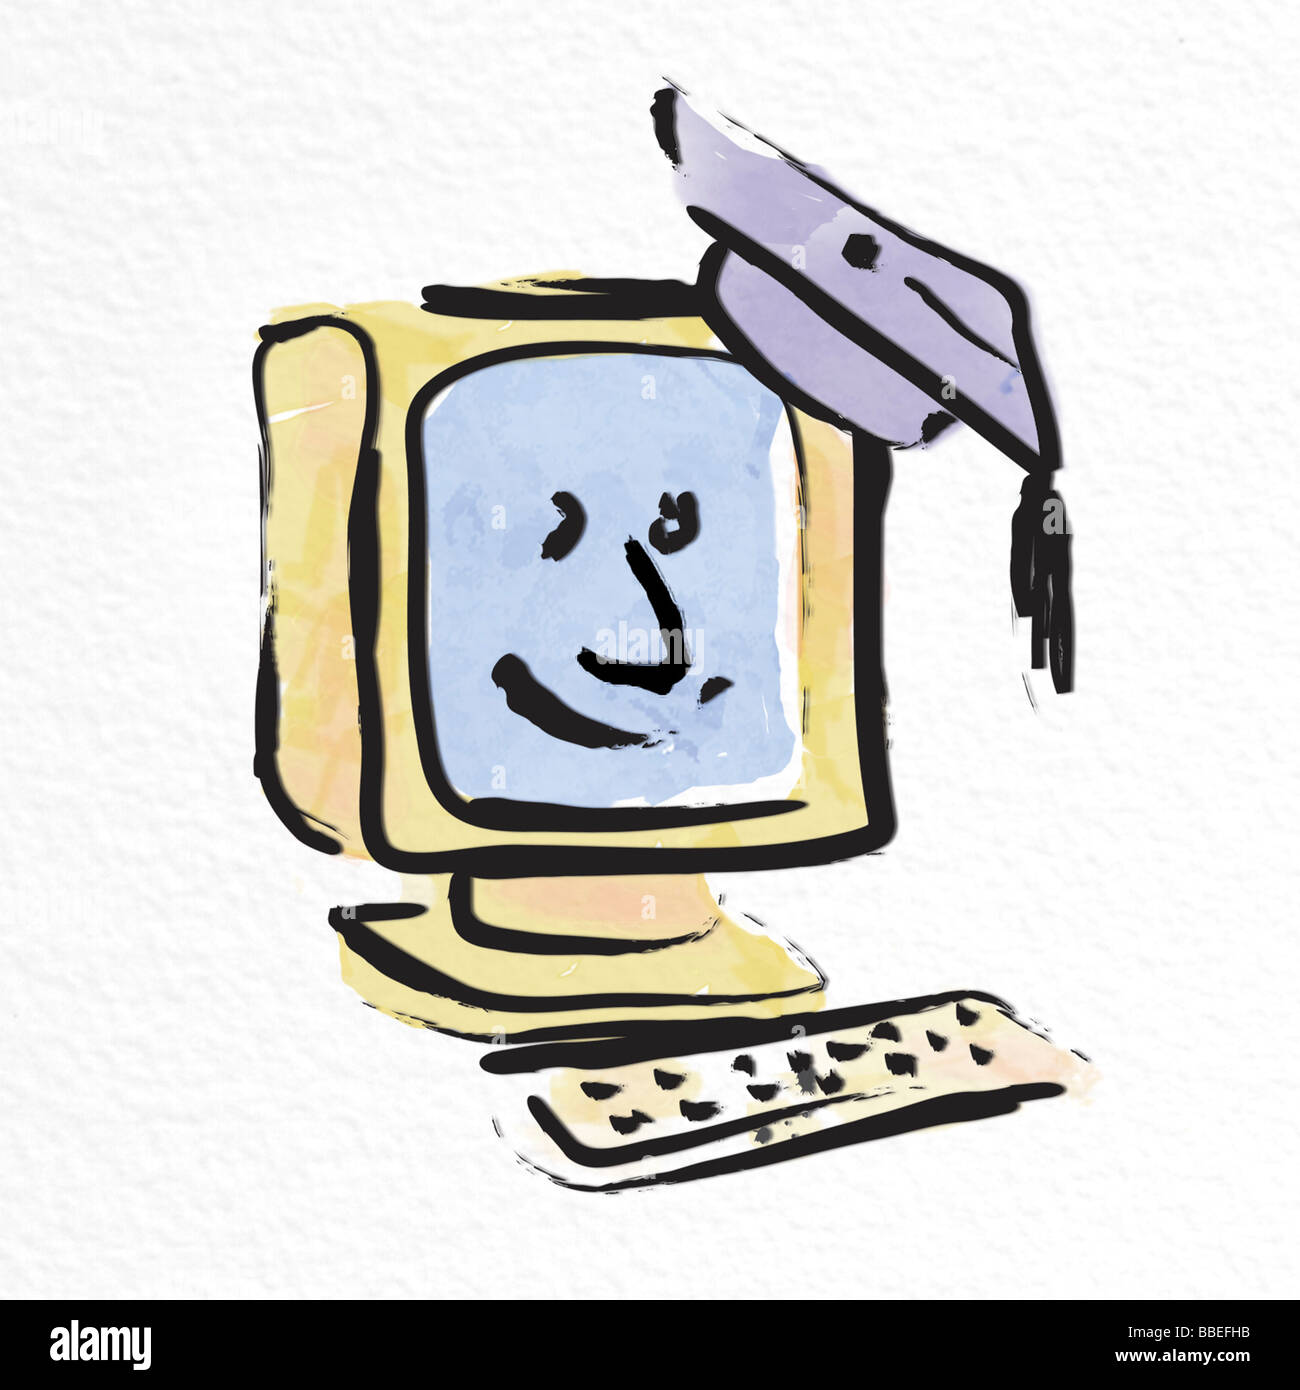 Illustration of Smiling Computer Wearing Mortarboard Stock Photo